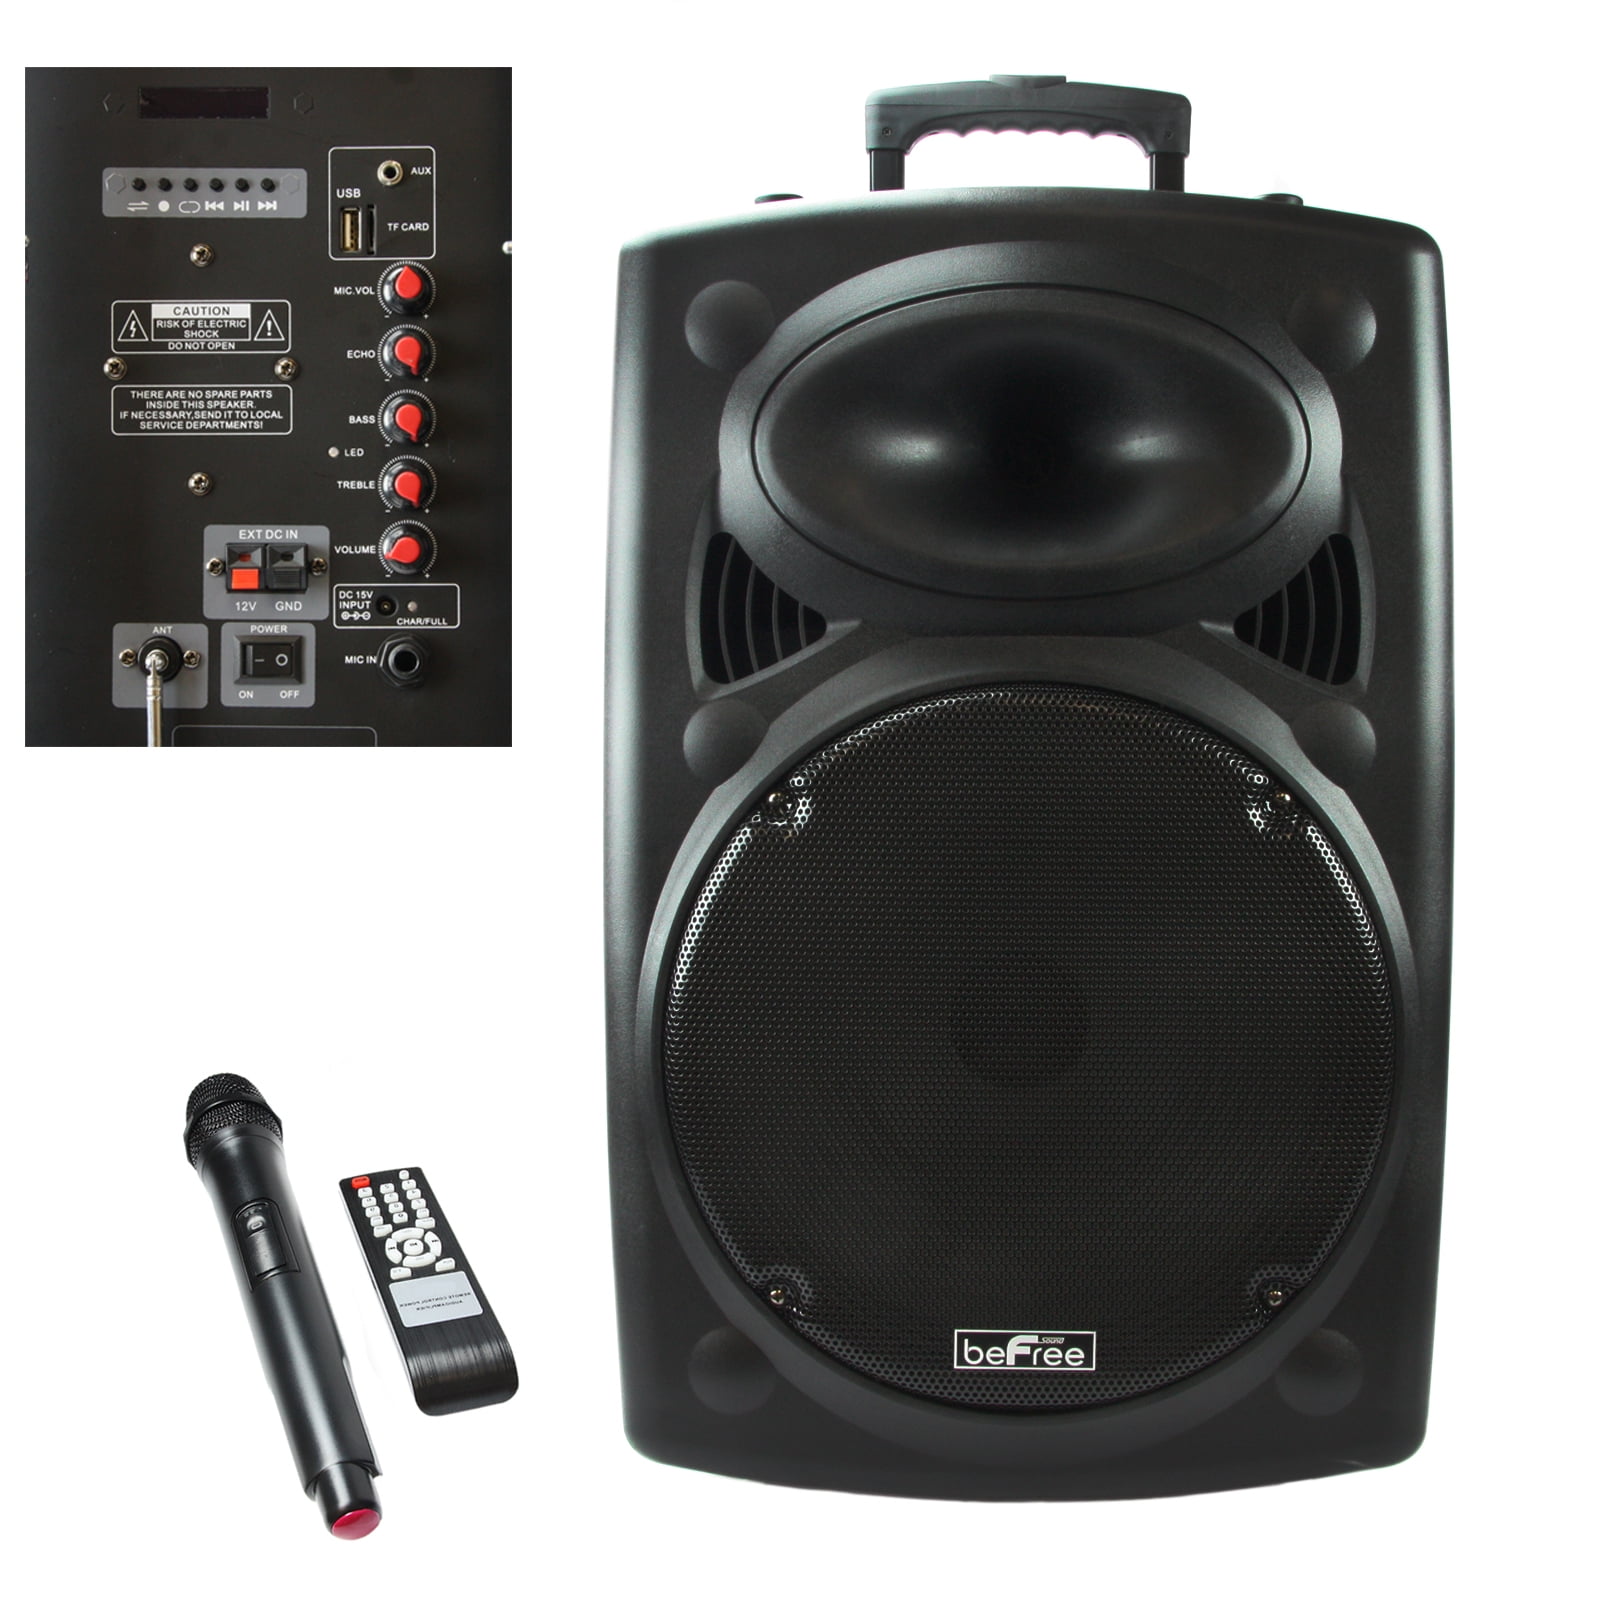 beFree Sound 15 Inch Woofer Portable 